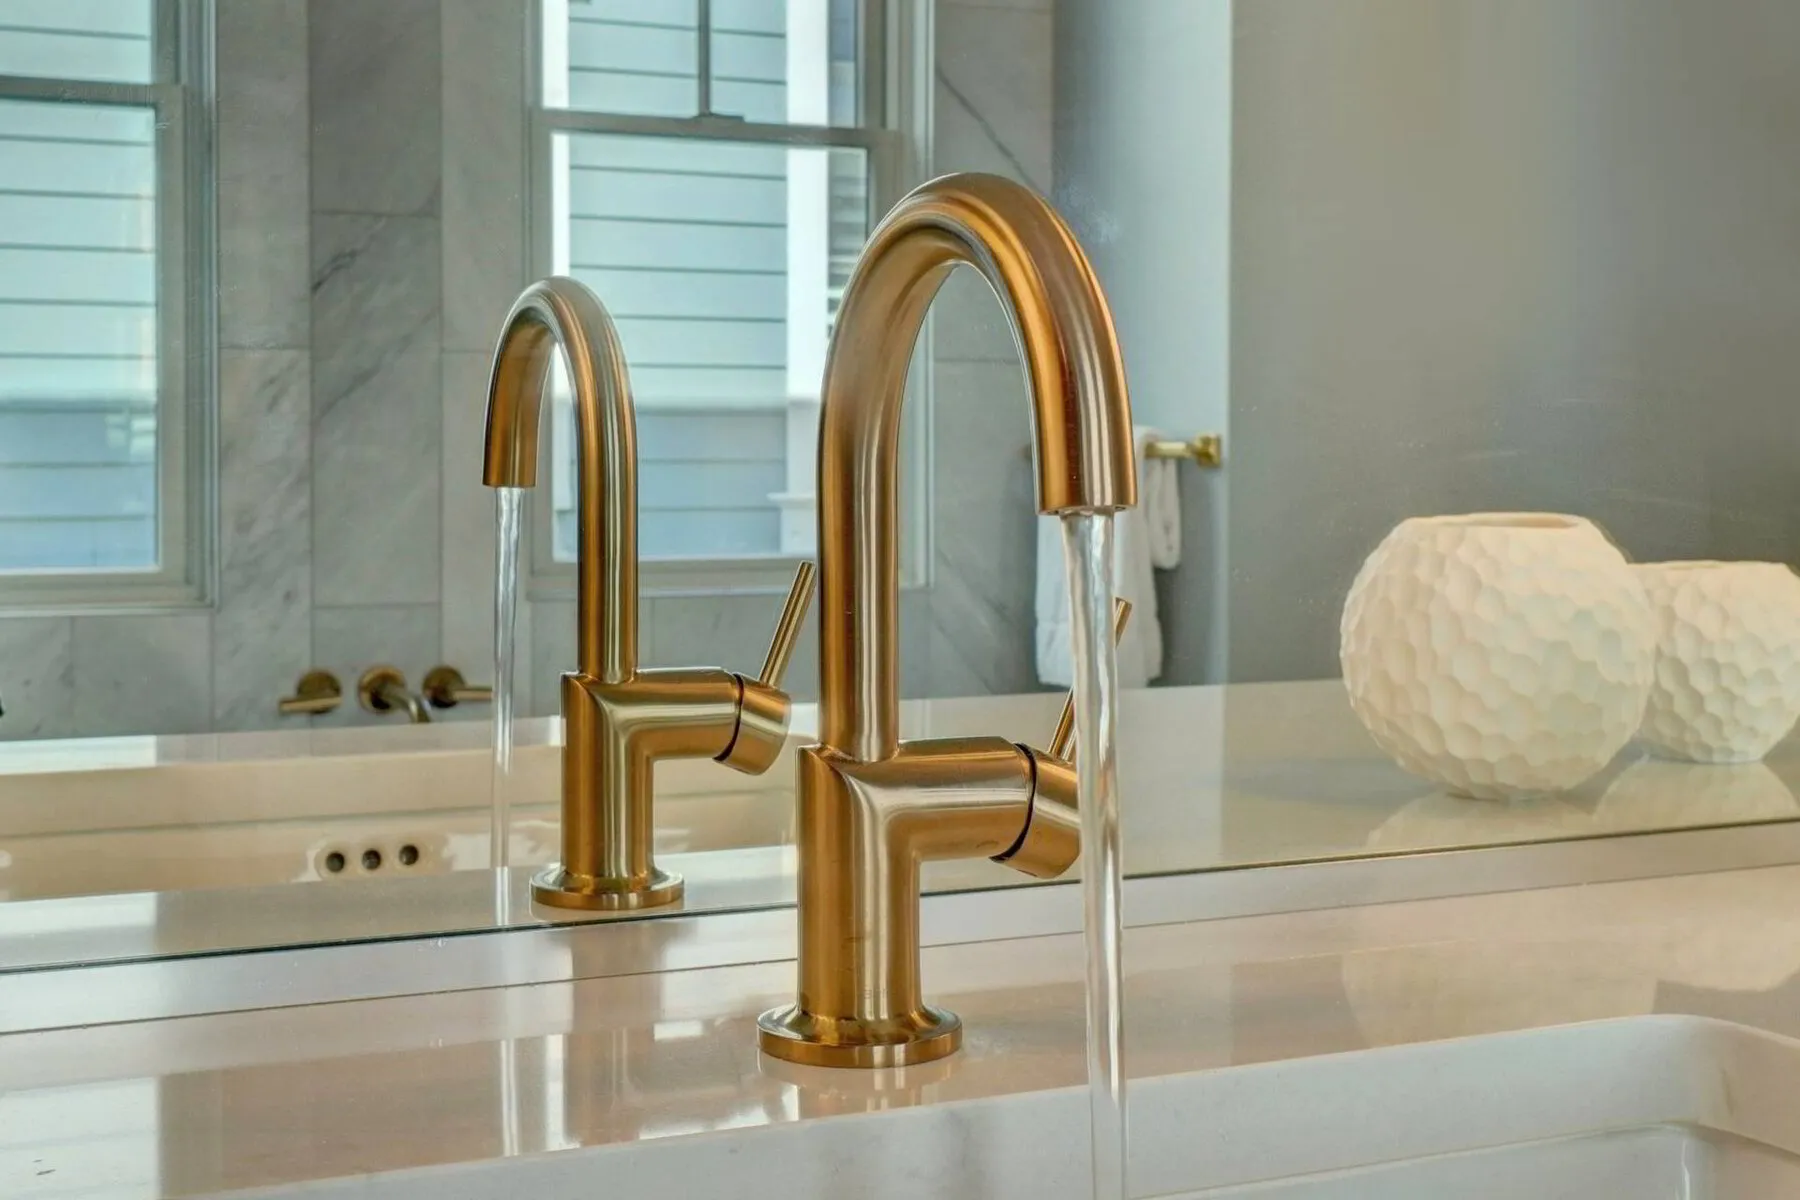 Copper finished faucet in a modern bathroom